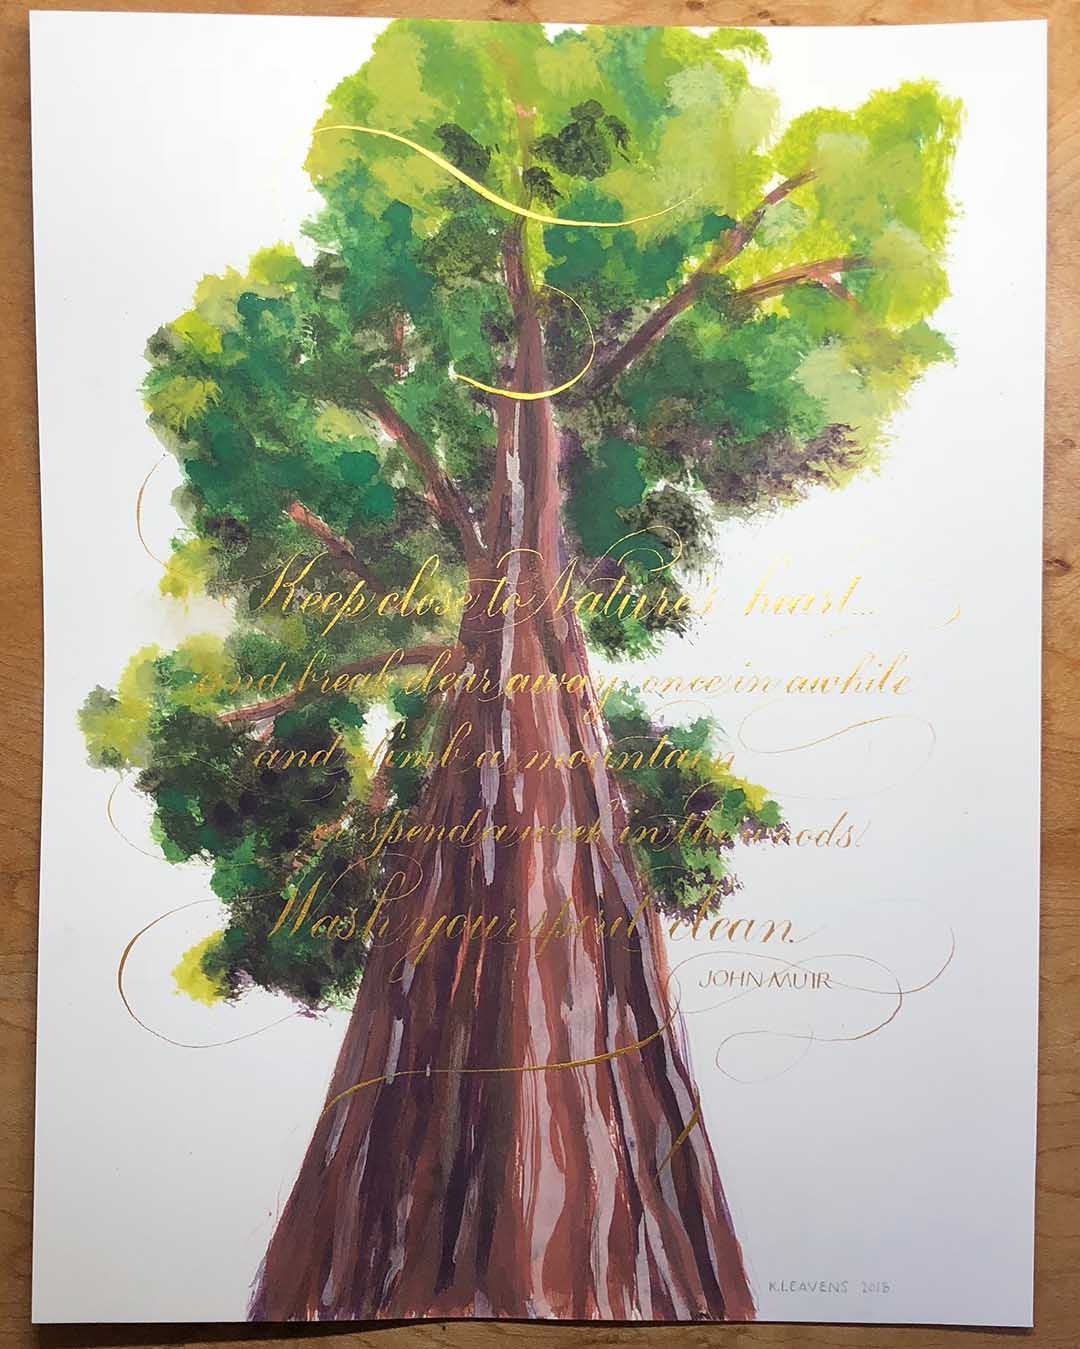 Calligraphic John Muir quote artistically intwined with redwood tree illustration by Katie Leavens